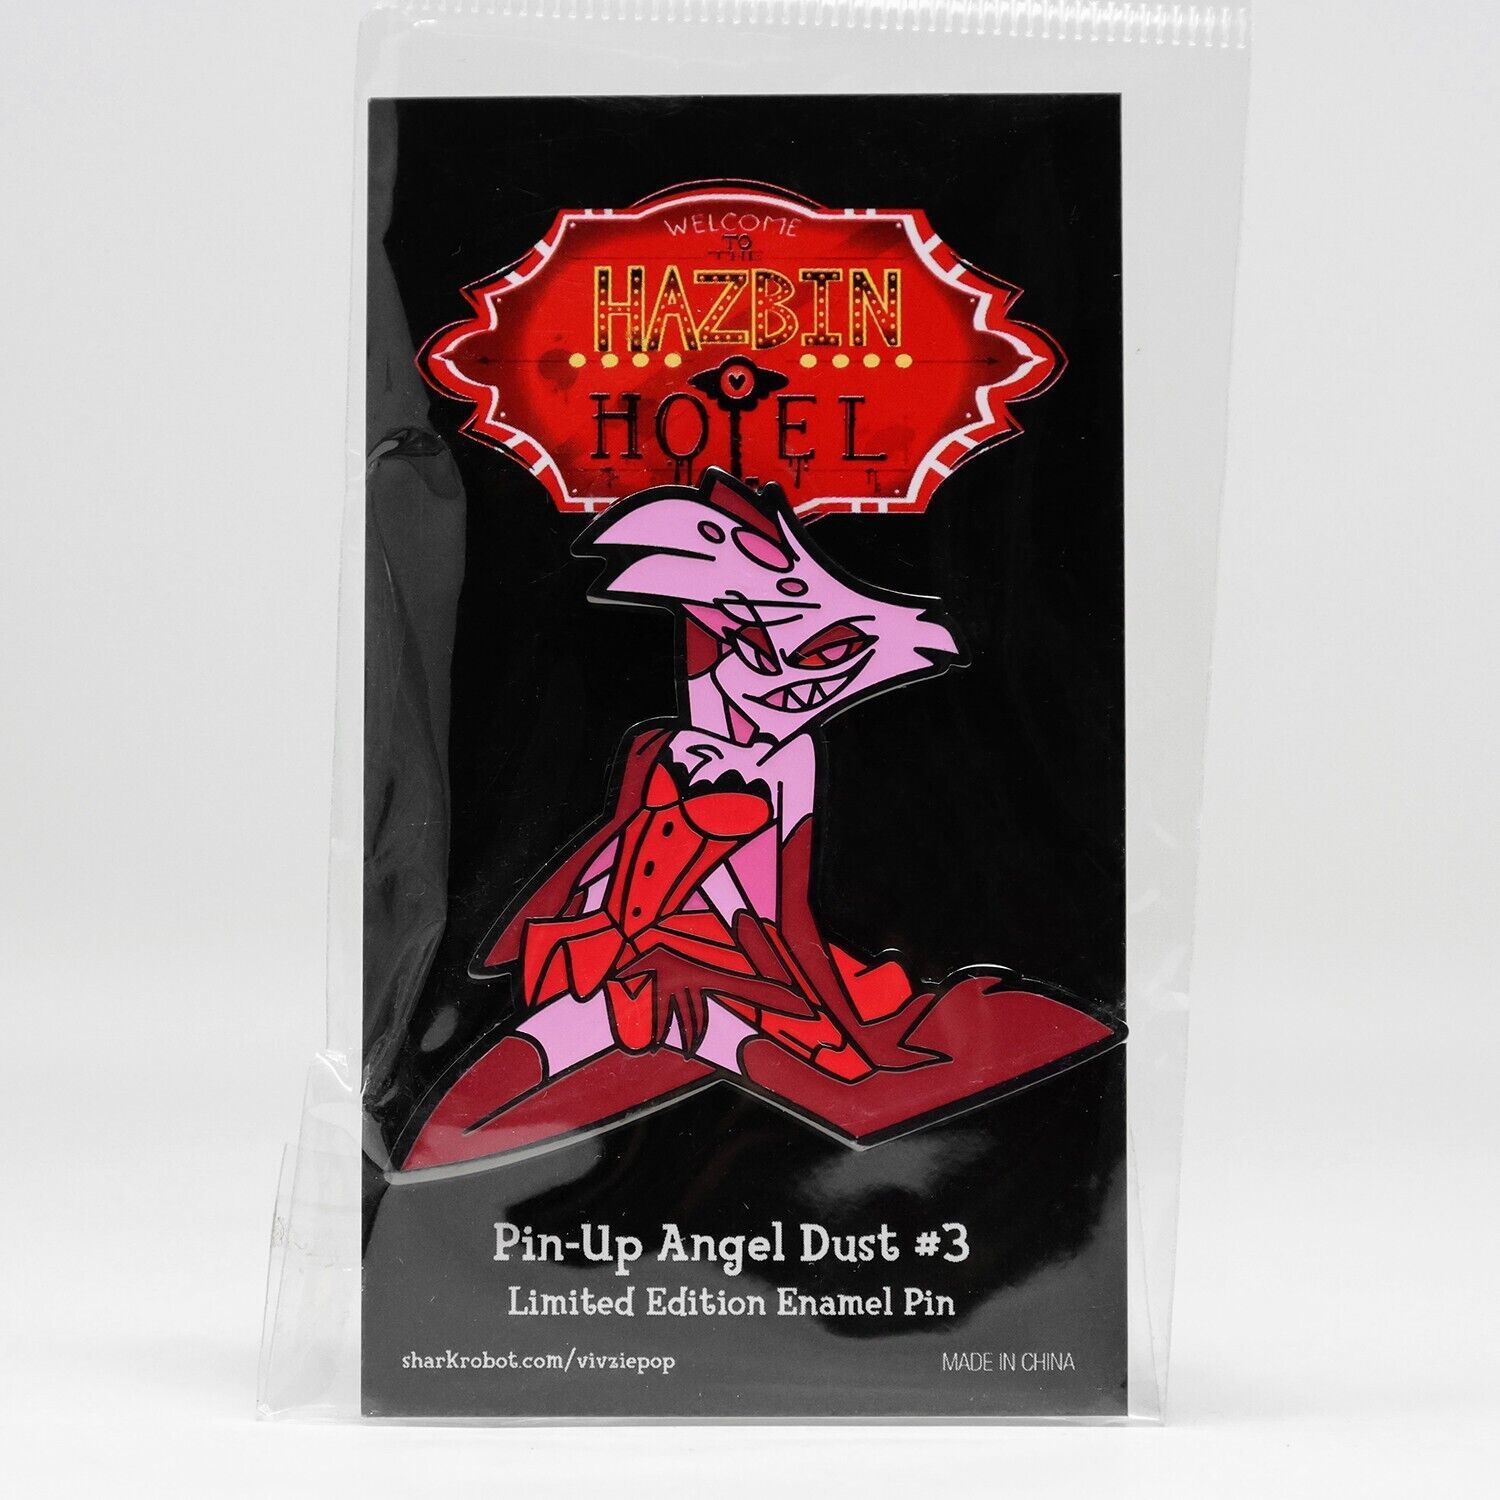 Primary image for Hazbin Hotel Pin-Up Angel Dust #3 Limited Edition Enamel Pin Valentine's